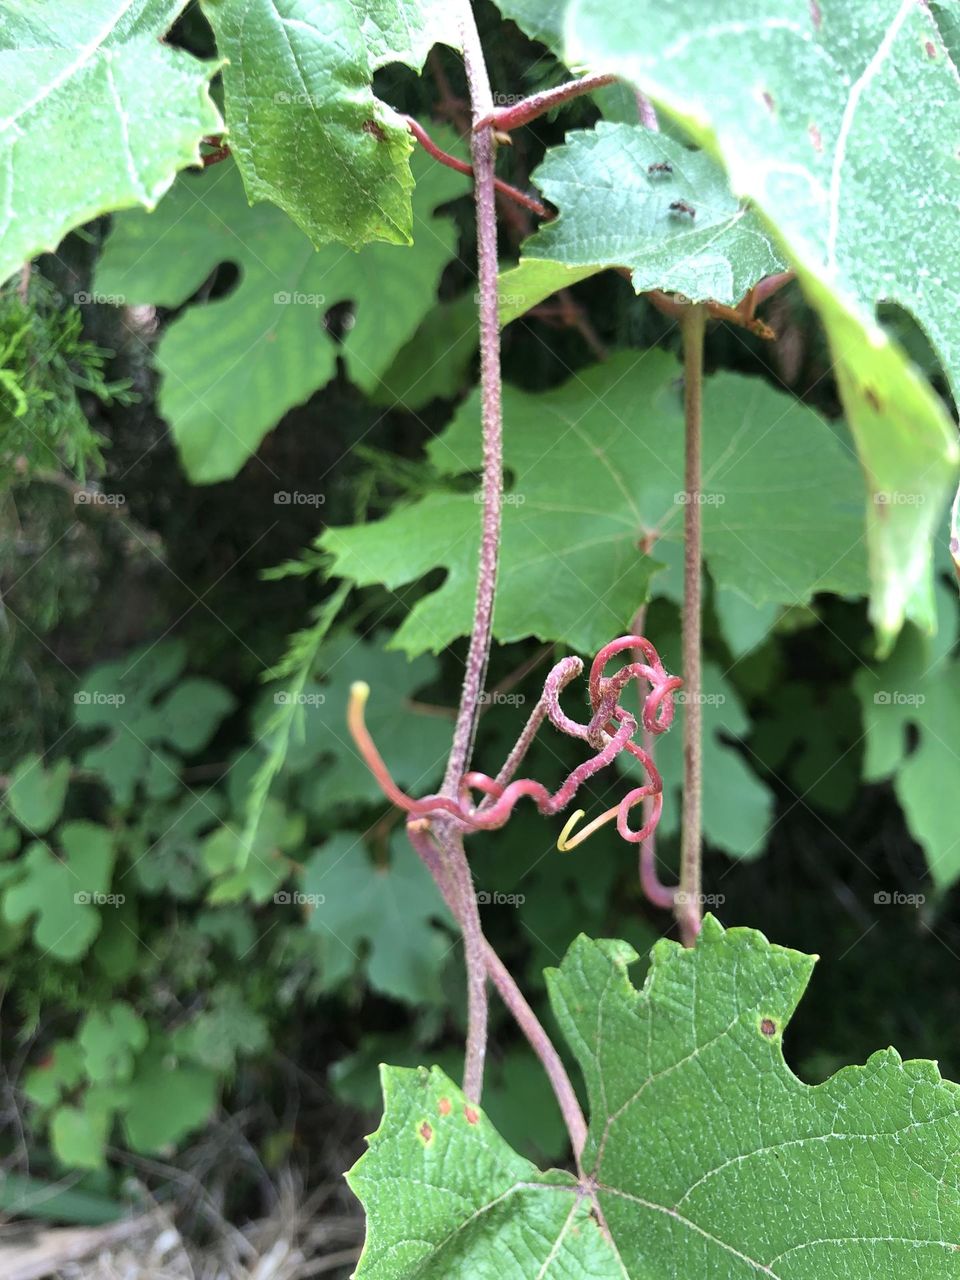 Closeup of pink vines tangling in the undergrowth. Nature creates abstract design of green leaves and twirling stems.